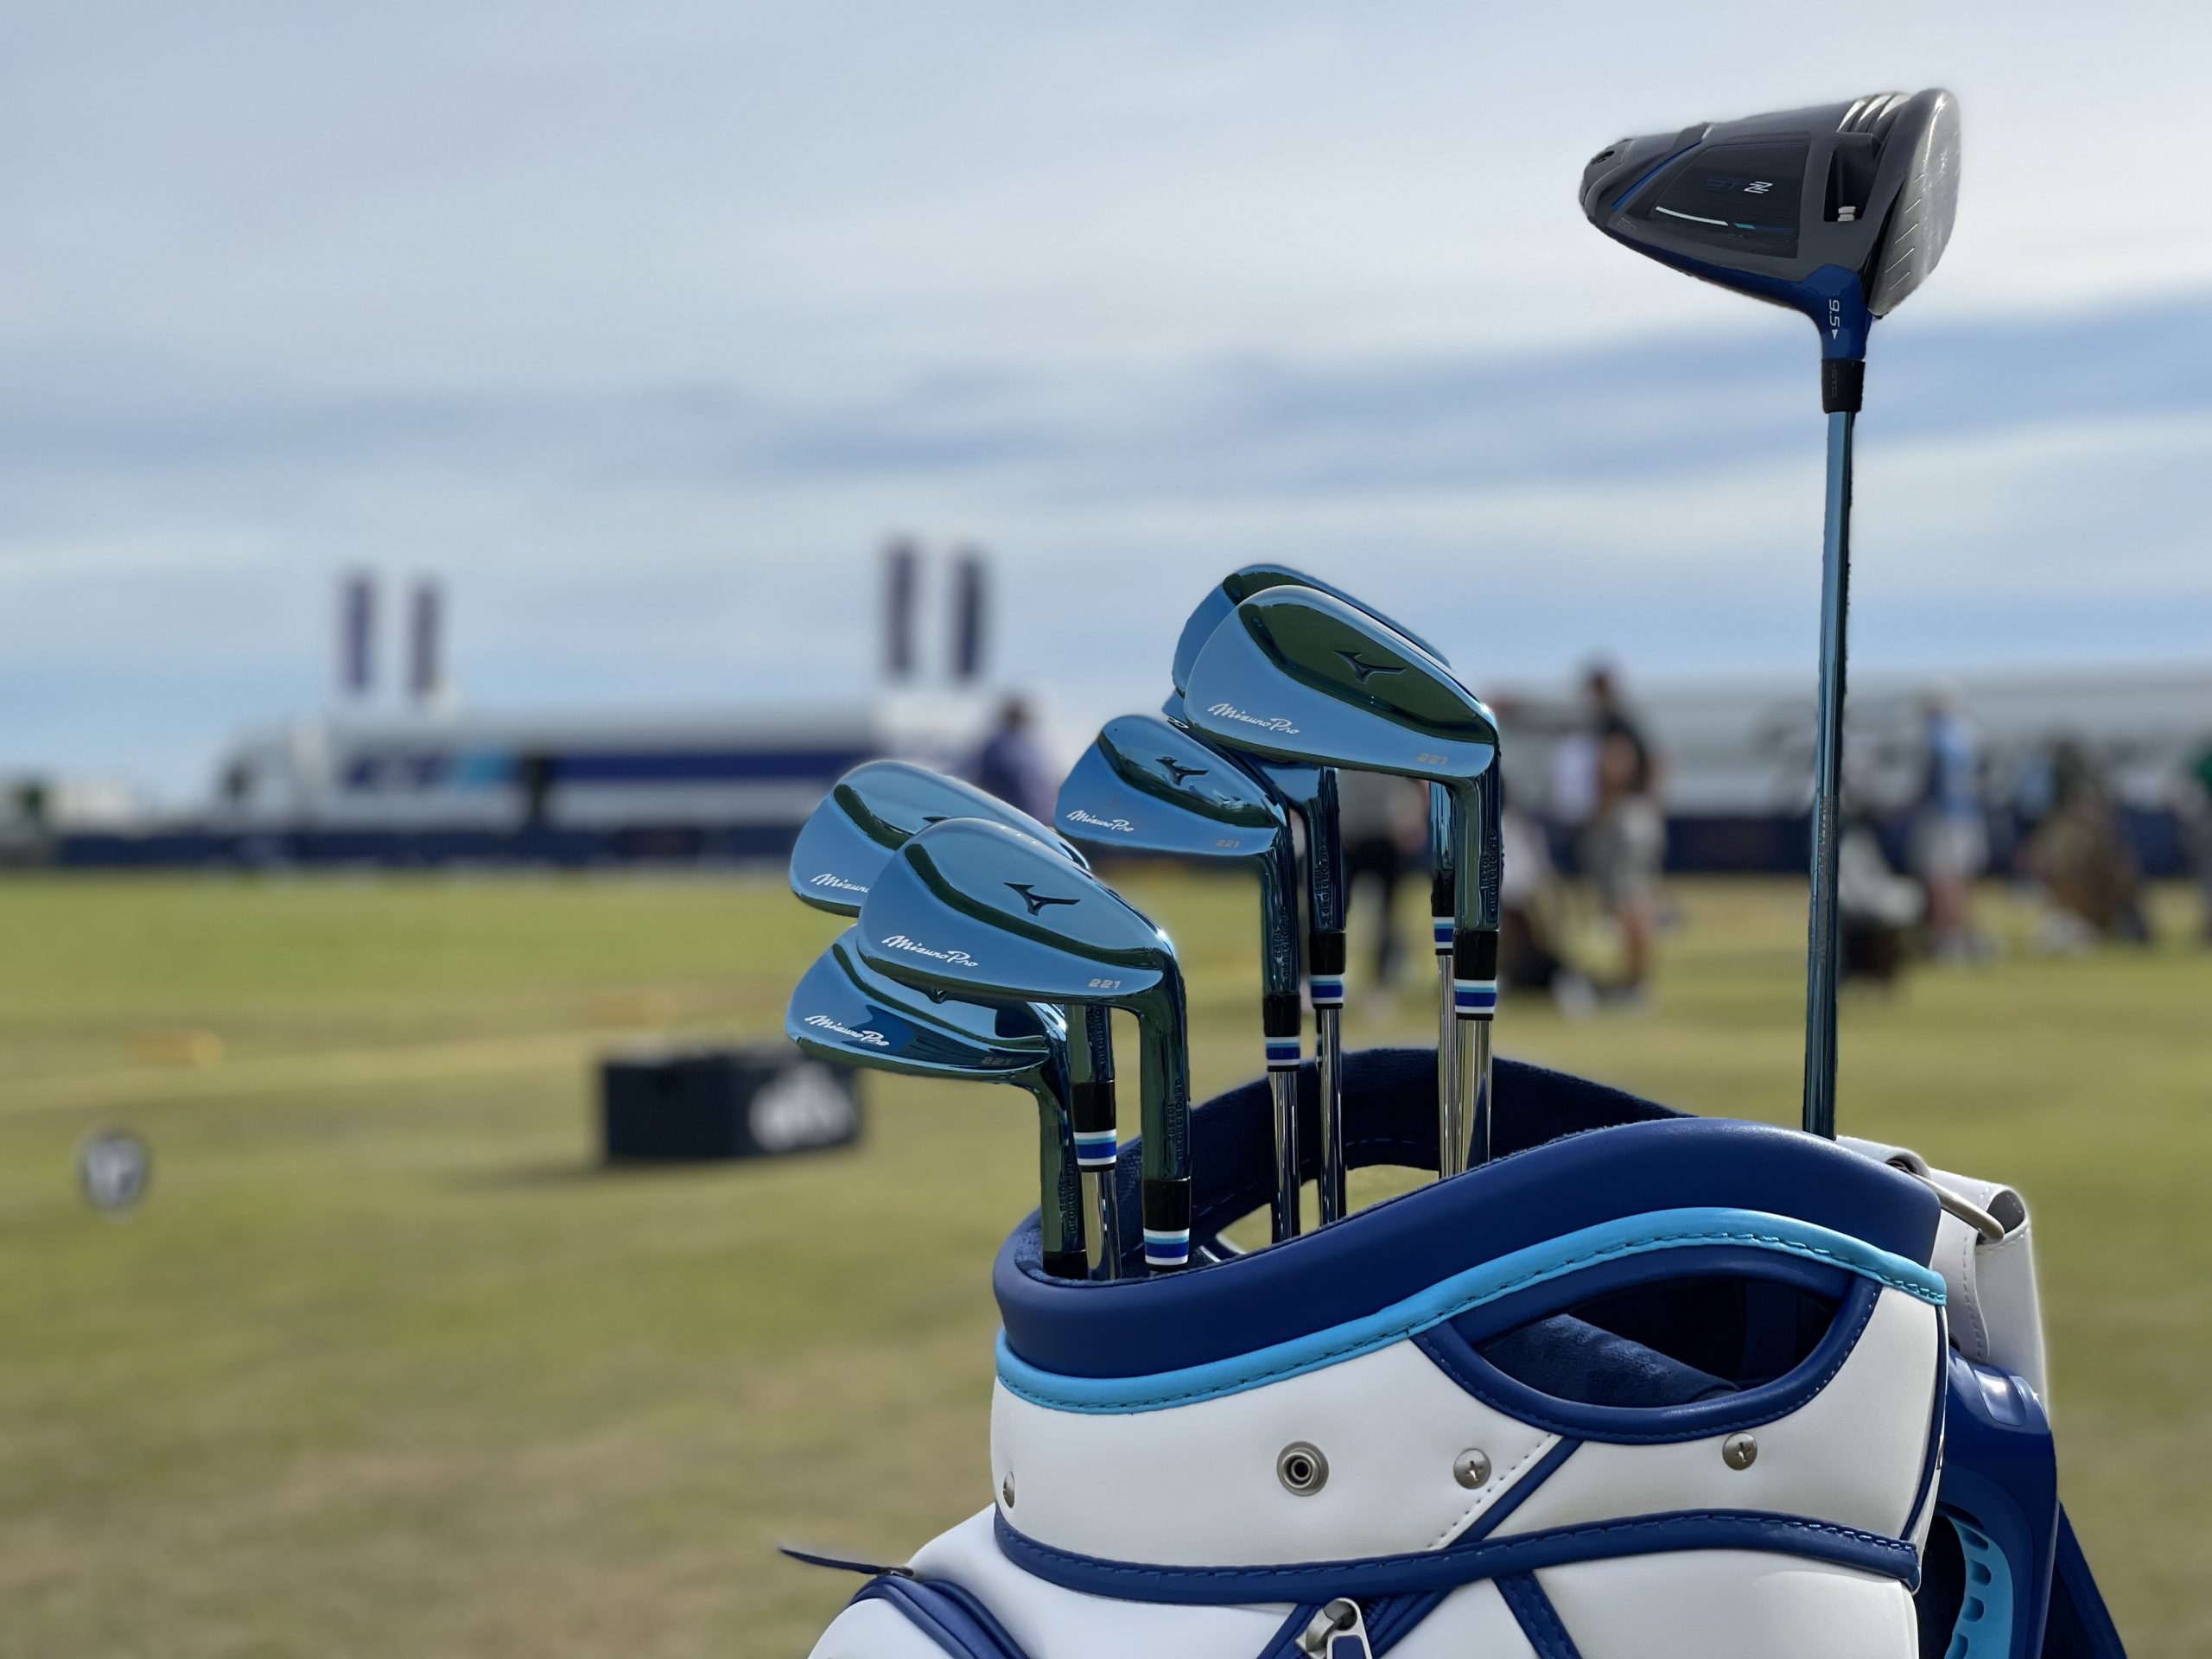 Golf Clubs Buying Guide What Type Of Clubs Do You Need?